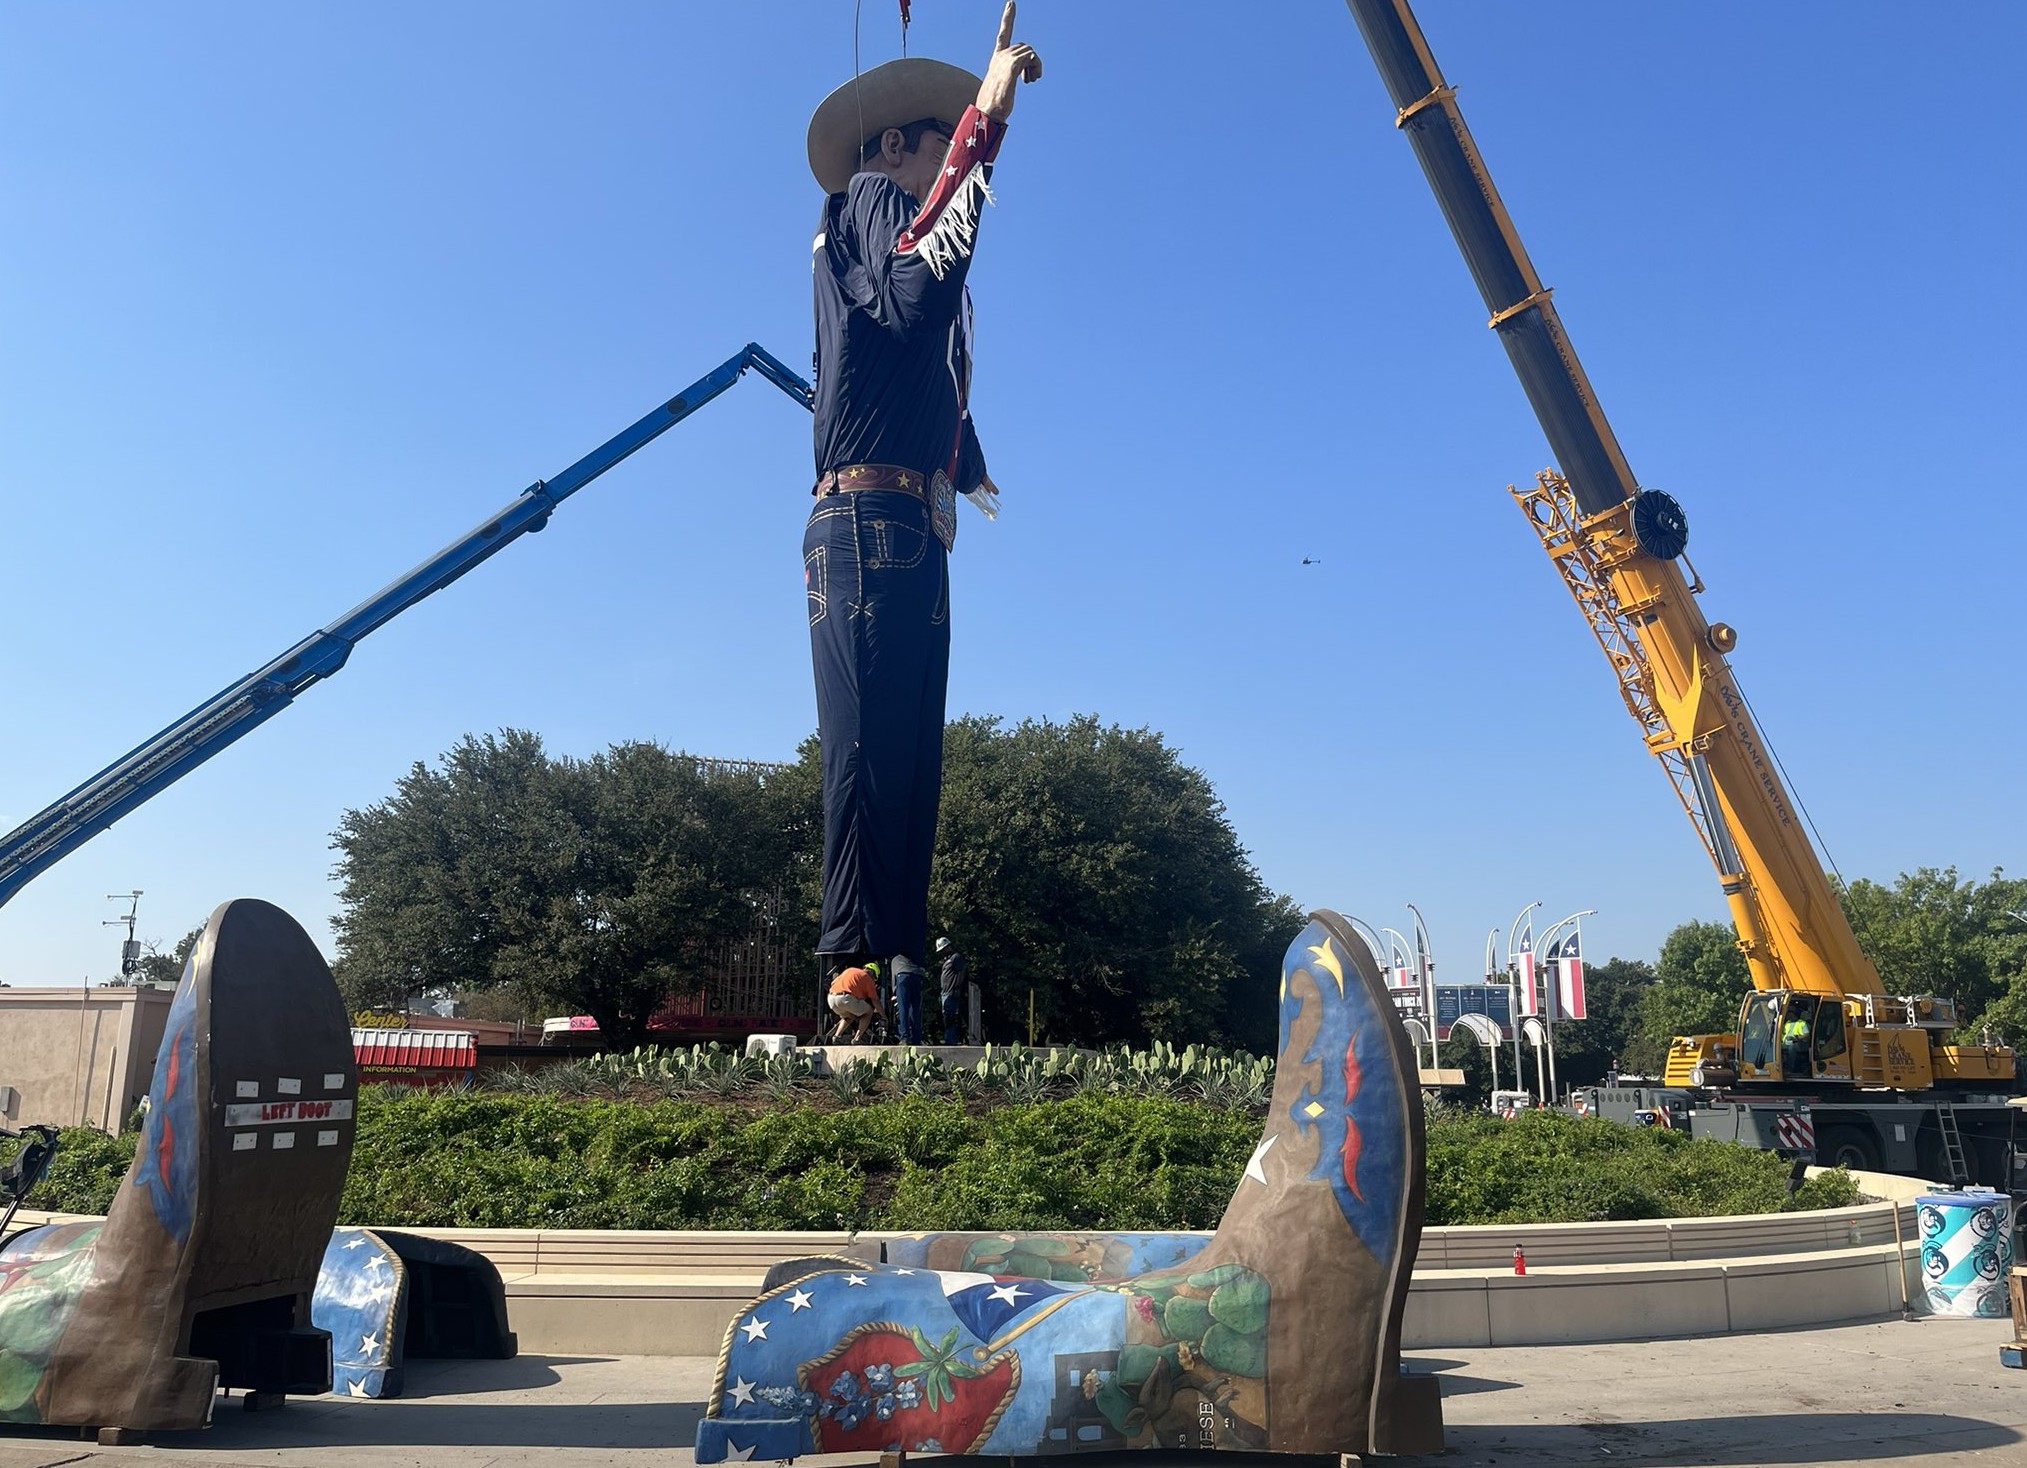  Big Tex in Place ahead of State Fair of Texas 